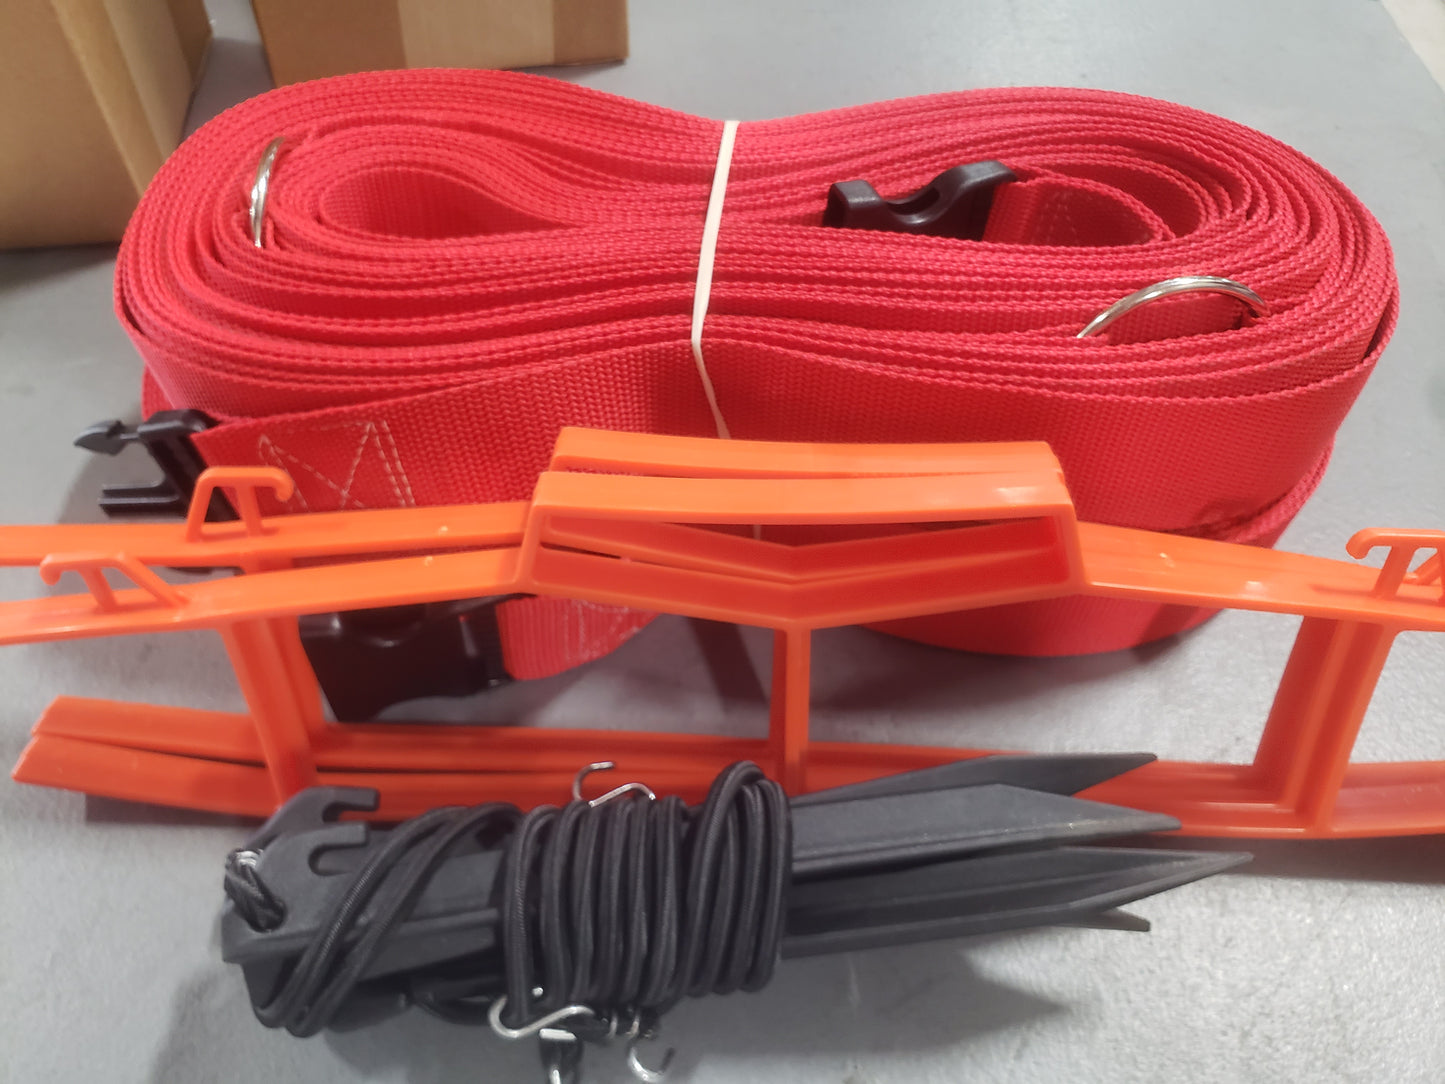 CLEARANCE ITEM #53: 19NA-S-Red (30'x60' Volleyball Boundary Non-Adjustable 2" Webbing, Sand Pegs, Red)